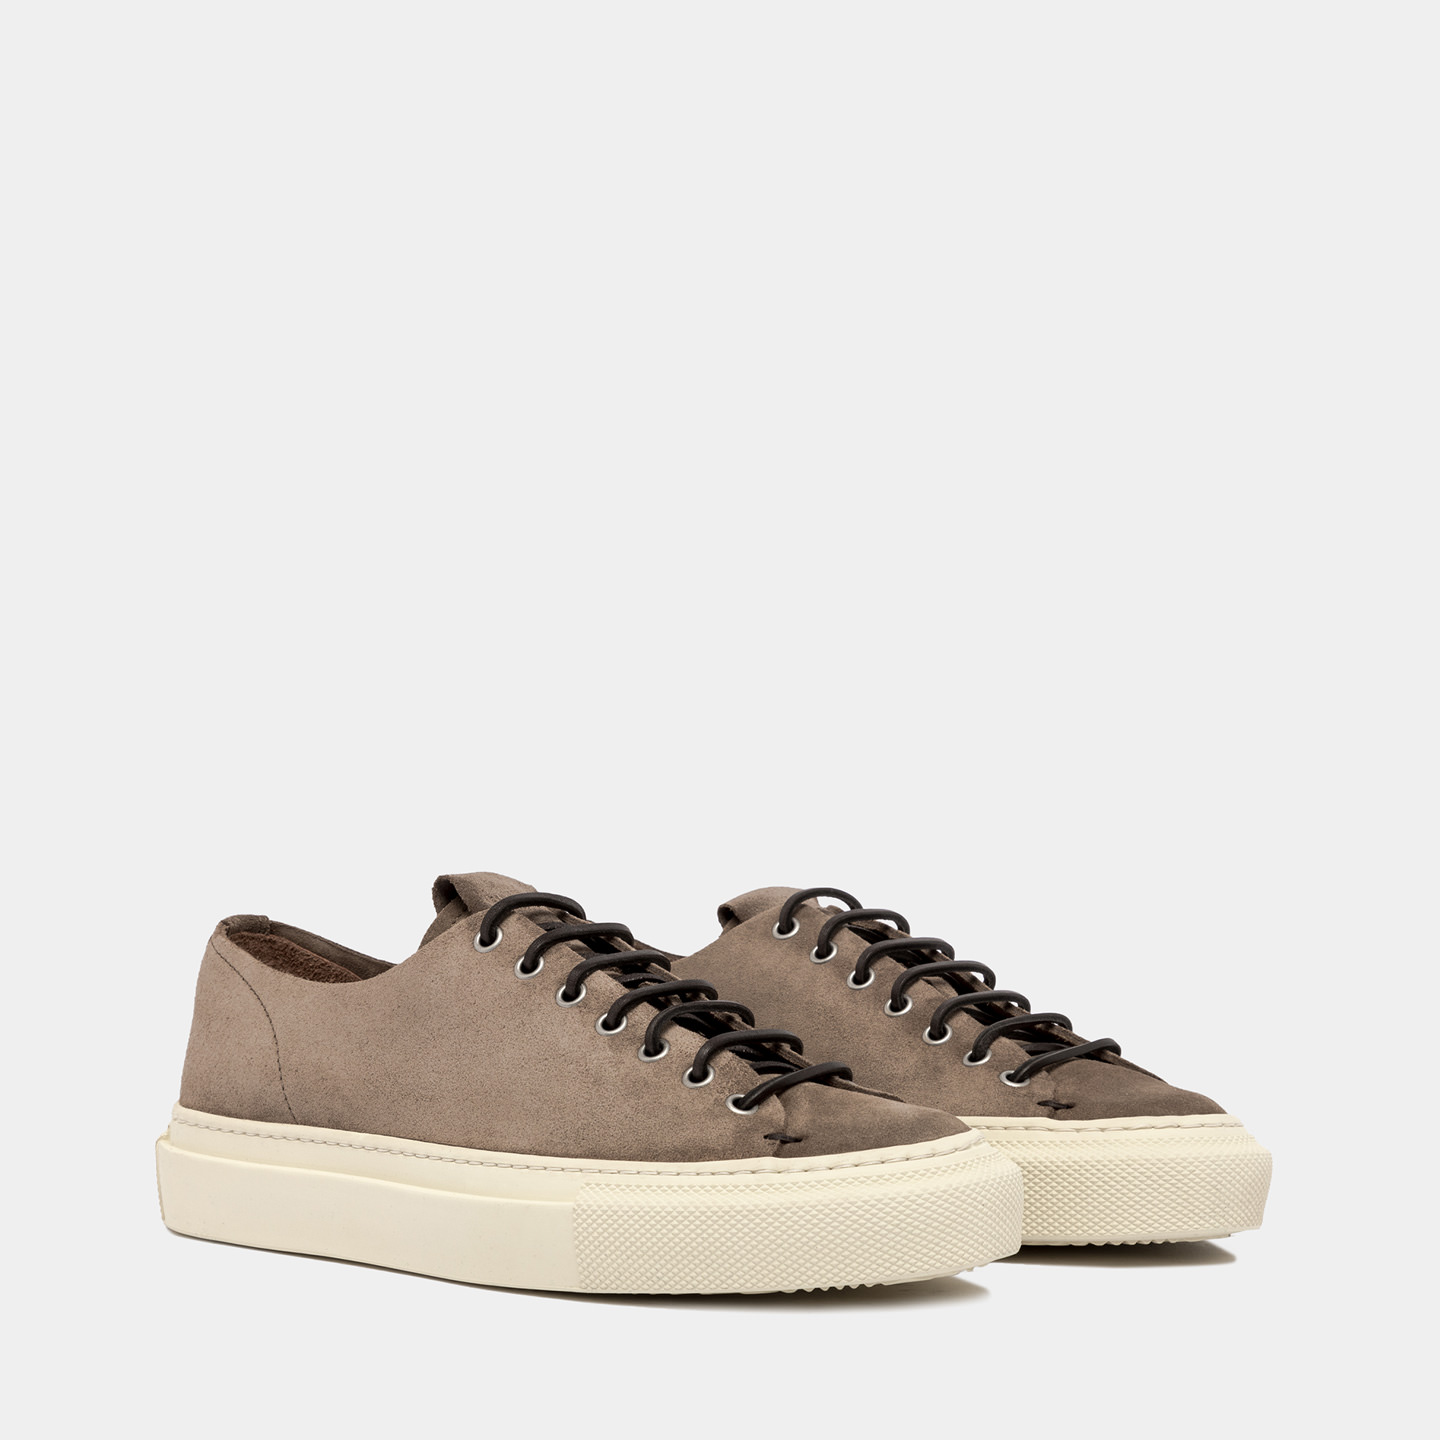 BUTTERO SNEAKERS BROWN SUEDE B10030GORH-UG1/06-TABACCO